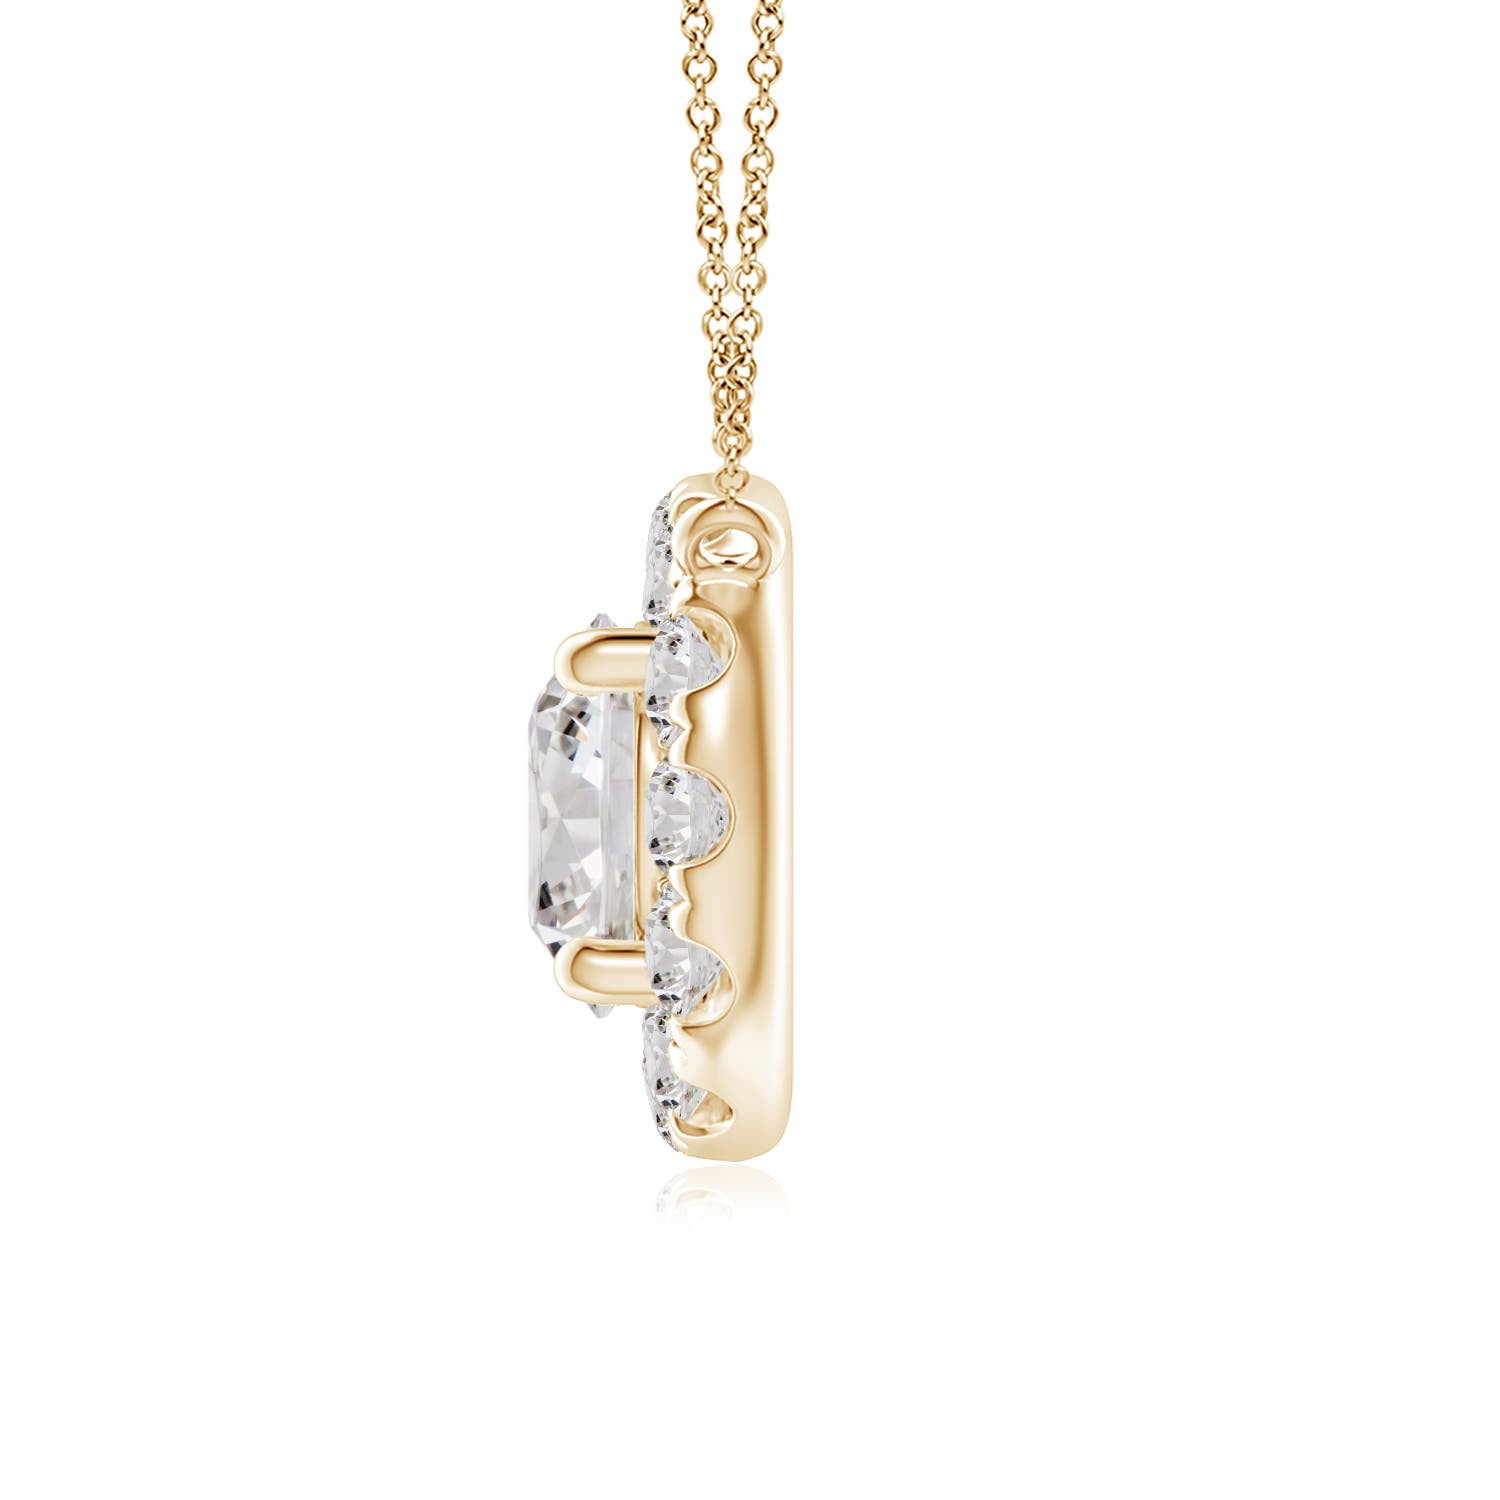 ANGARA Natural 0.4 Ct. Diamond Solitaire Pendant Necklace in 14K